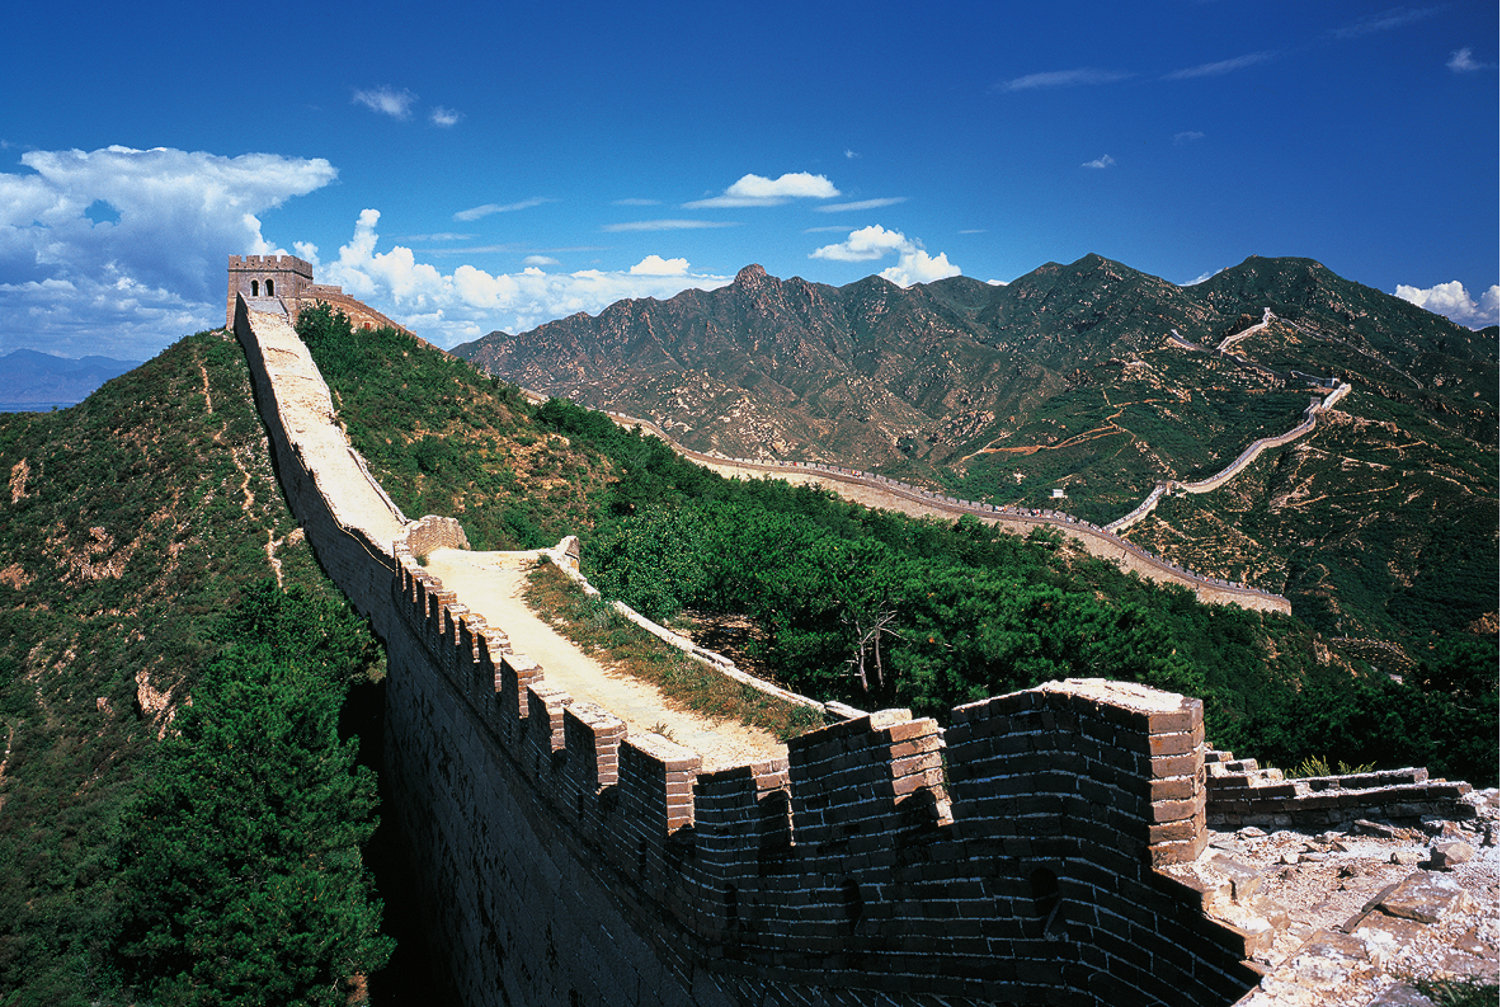 The Great Wall Of China Travel Glow in the Dark Puzzle